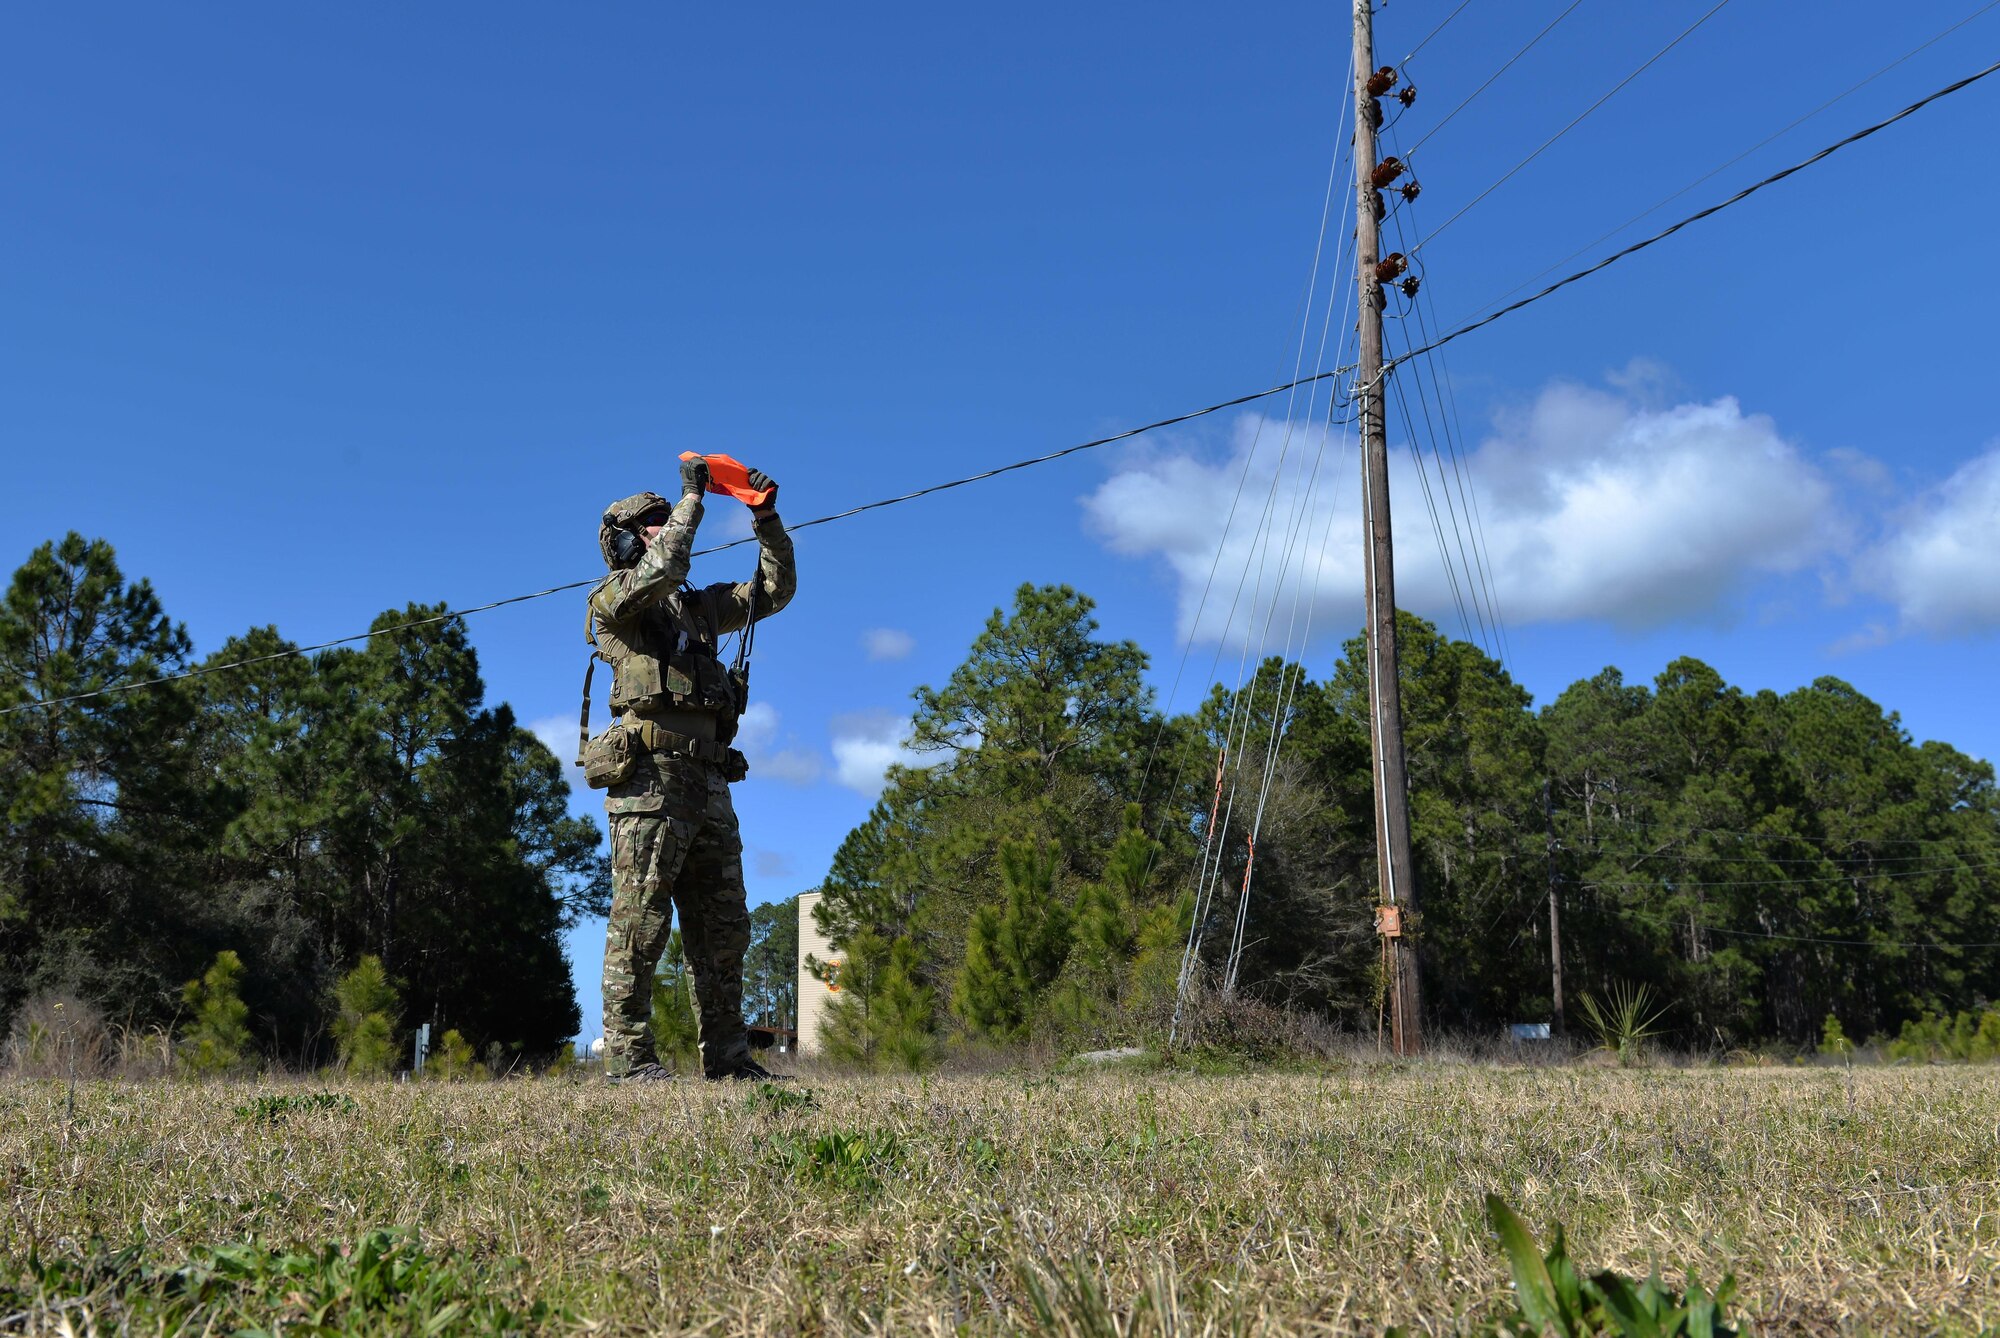 An Army Ranger from the 75th Ranger Regiment, 3rd Ranger Battalion, signals an aircraft to his team’s position at Hurlburt Field, Fla., Feb. 11, 2016. During this exercise, Rangers radioed coordinates to F-35A Lightning II pilots to simulate close air support. (U.S. Air Force photo/Senior Airman Andrea Posey)